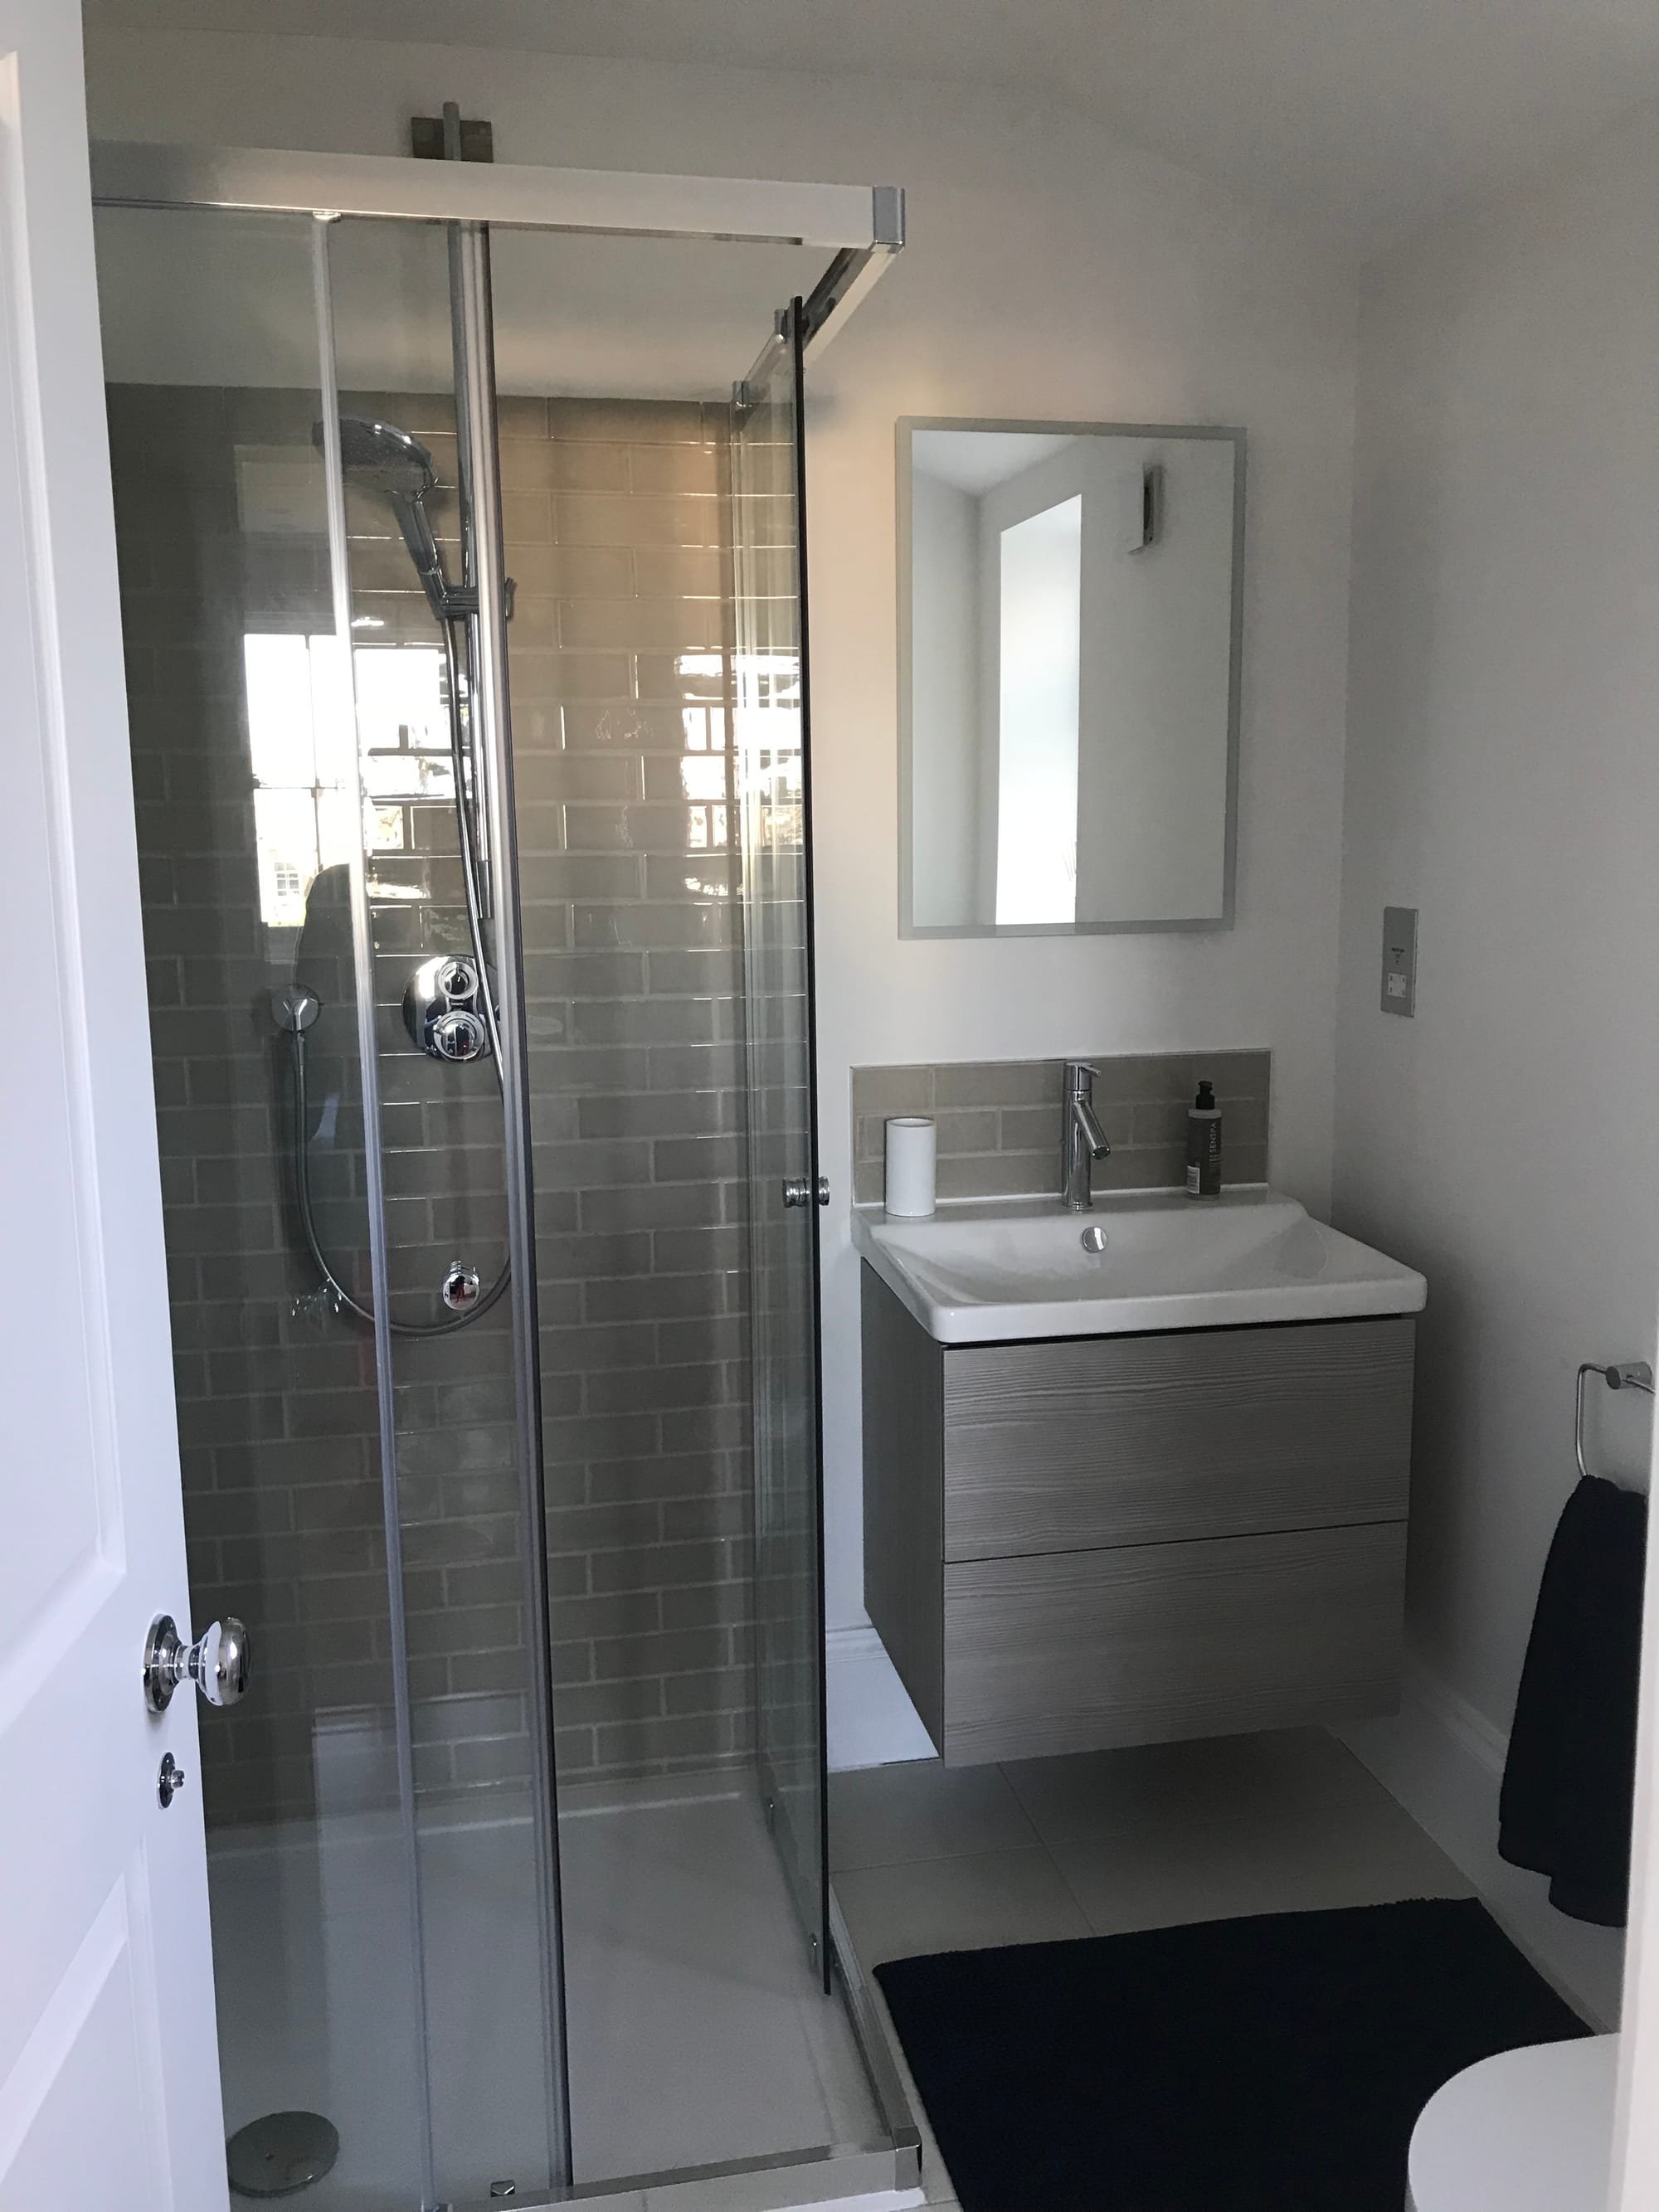 Careful planning and pocket doors can be used to convert the smallest of spaces into rooms. Like this en-suite shower room in wandsworth SW12 rear addition loft conversion extension.